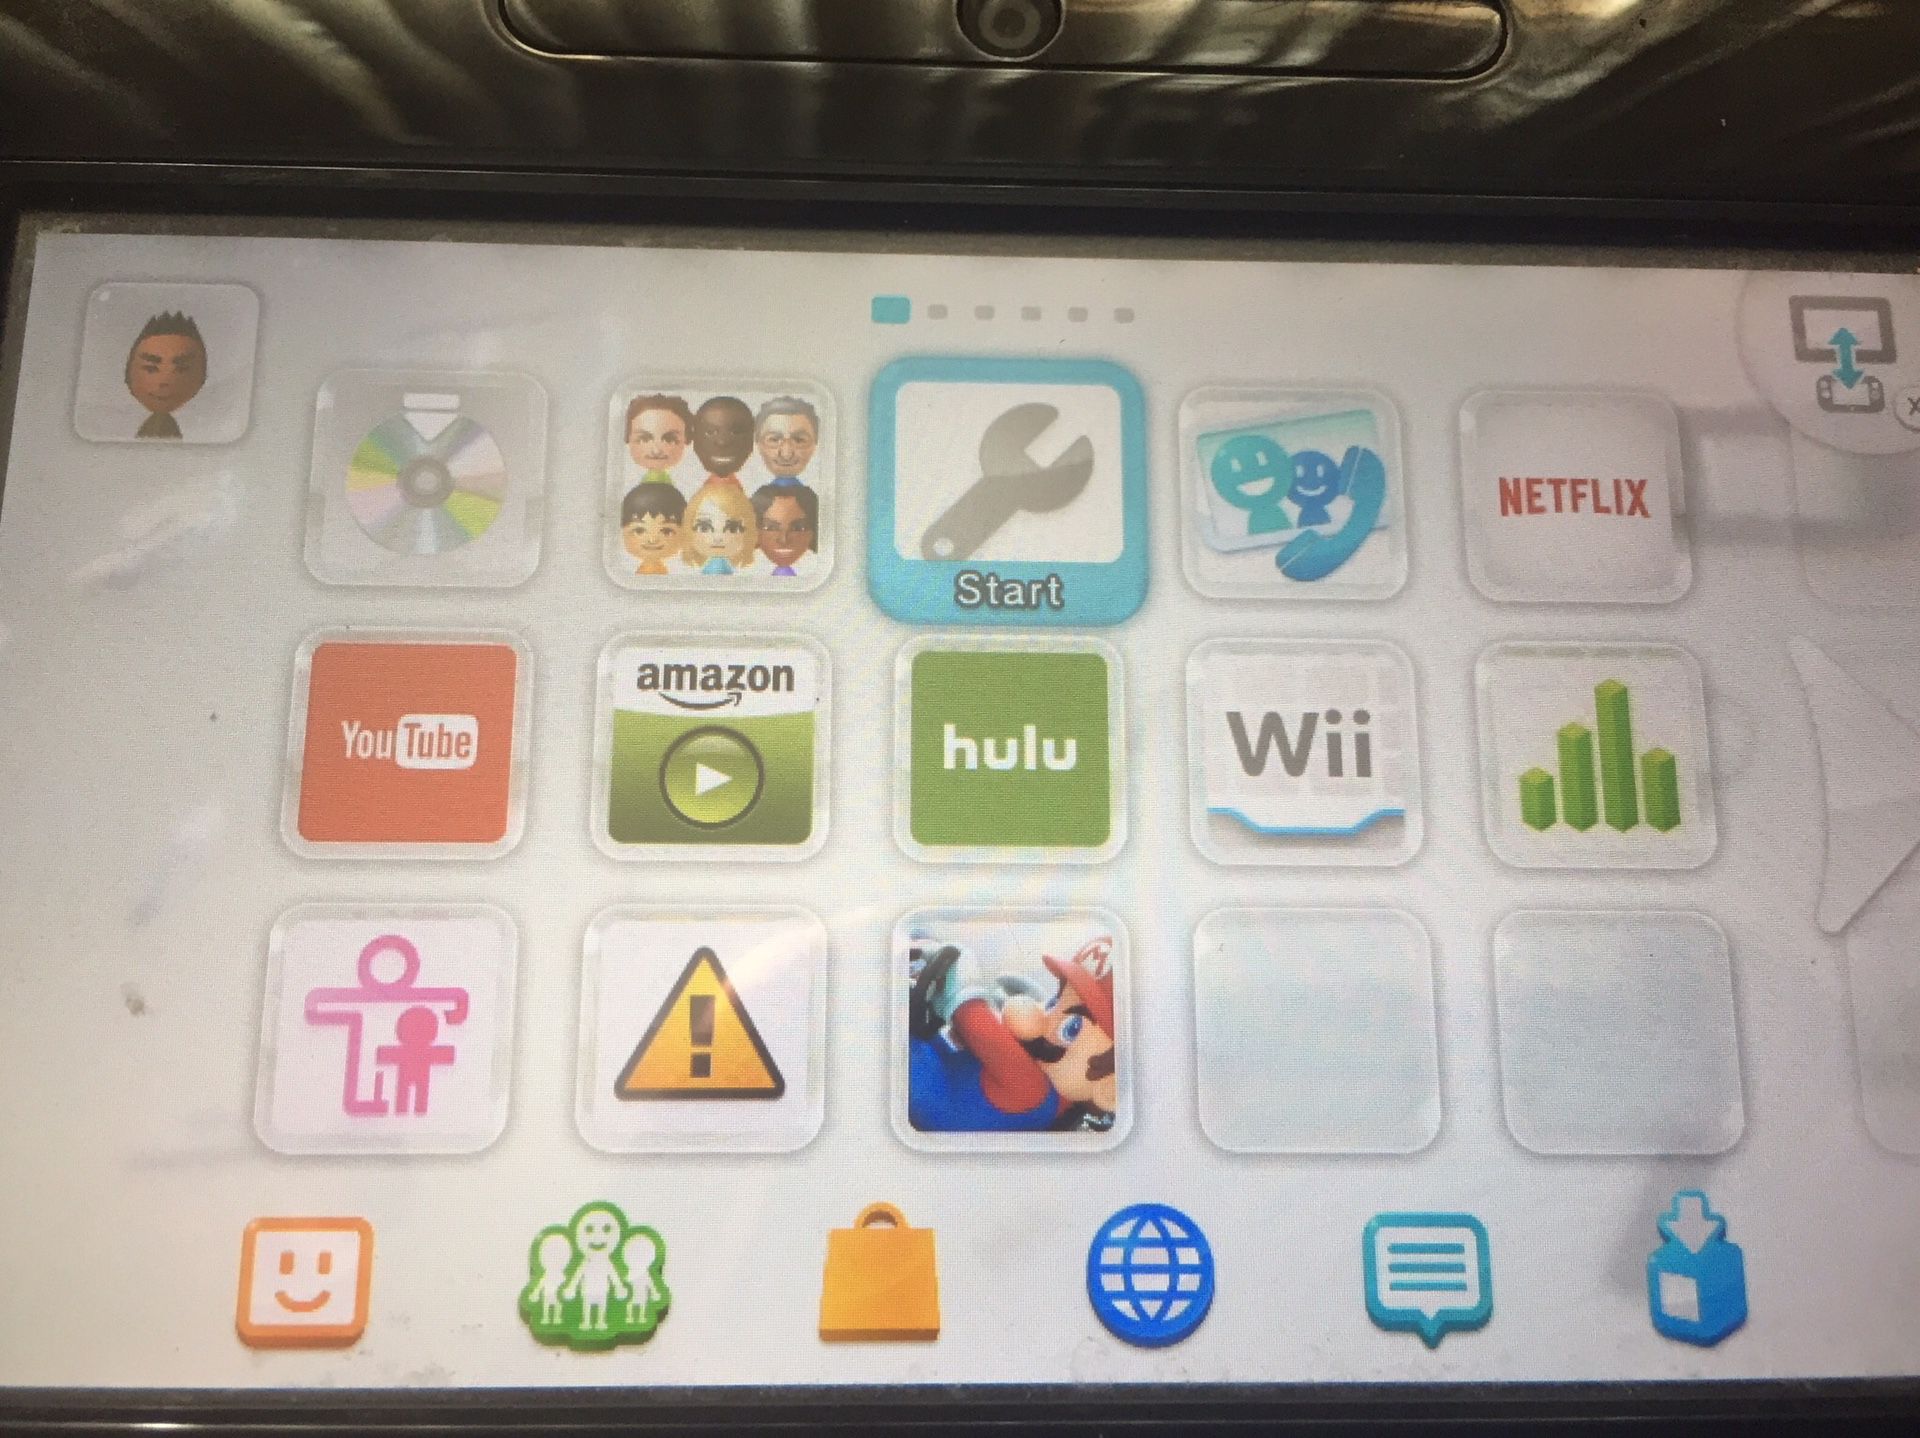 32GB Wii U complete System with Mario Kart